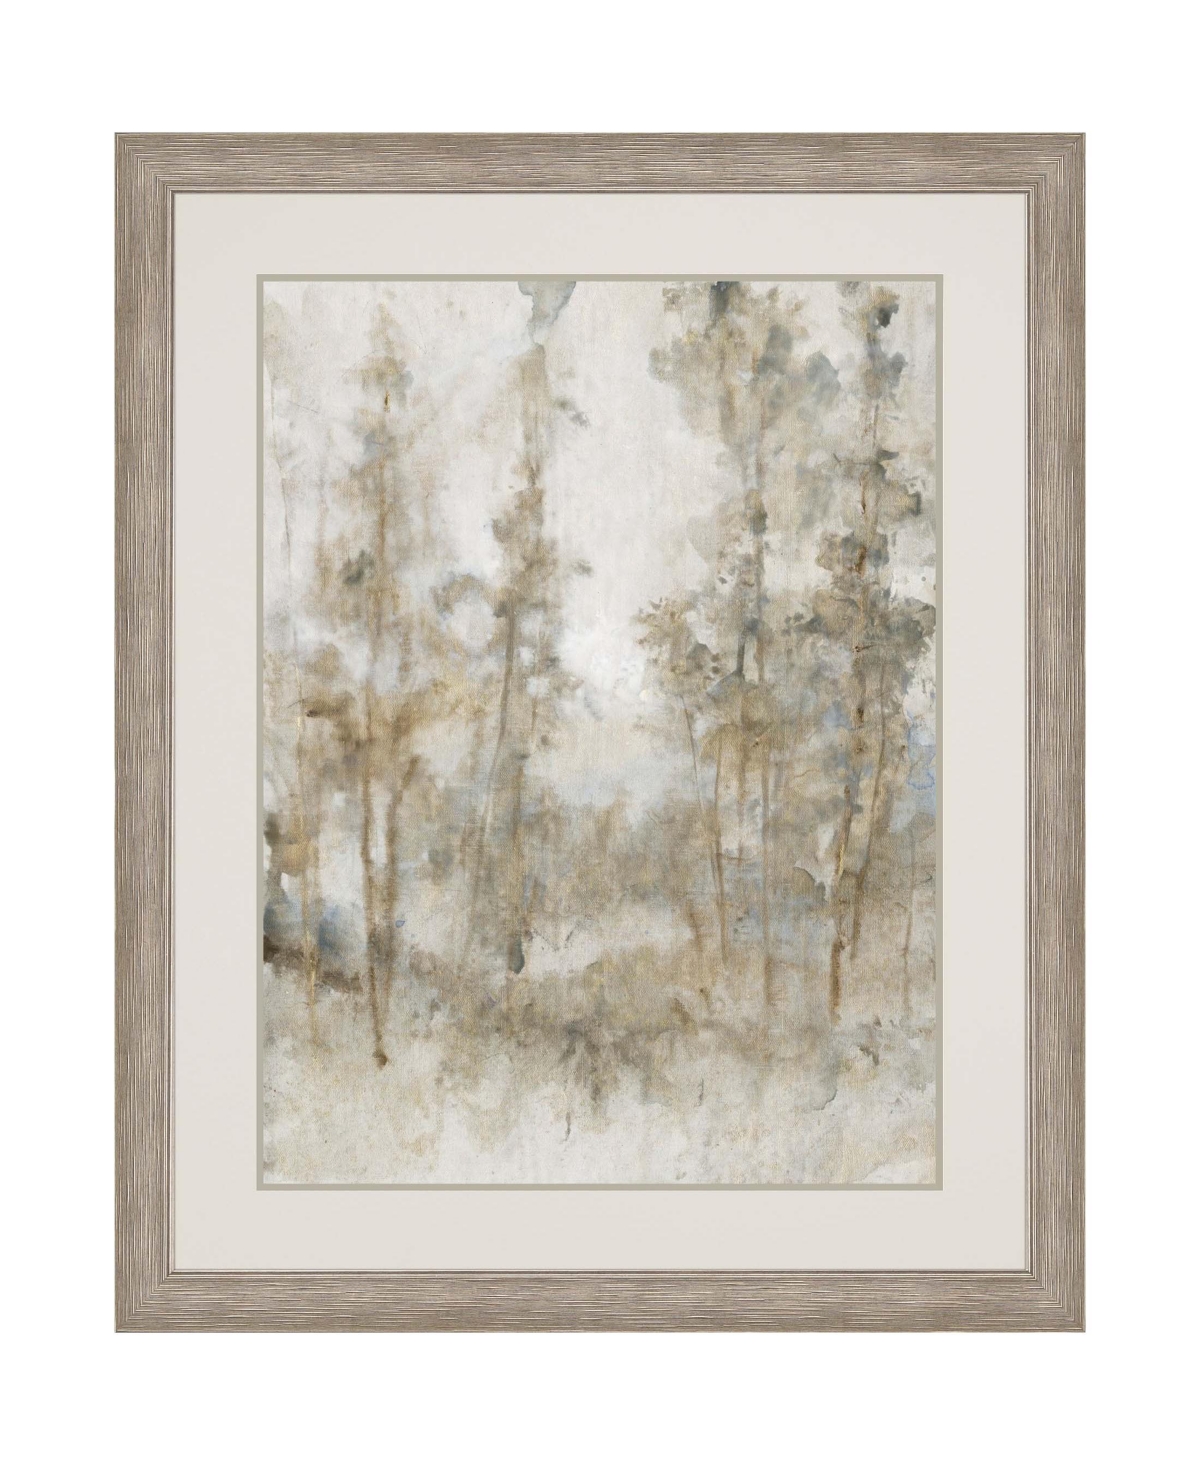 Paragon Picture Gallery Thicket Of Trees I Framed Art In Beige